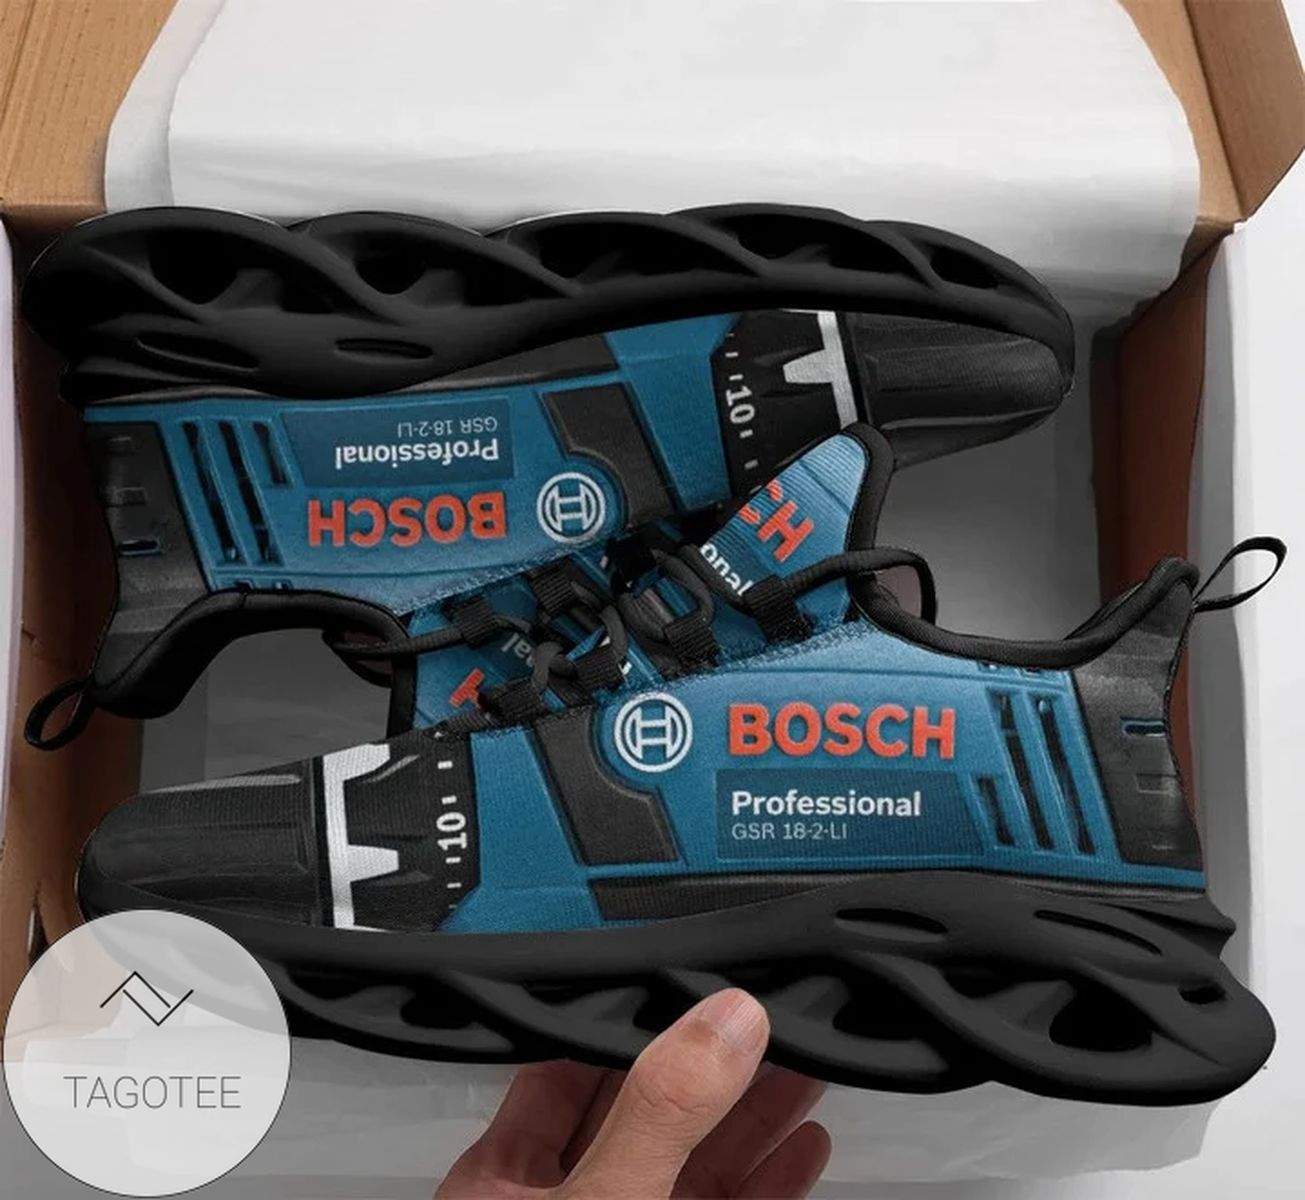 Bosch Professional Tool Max Soul Shoes - Tagotee